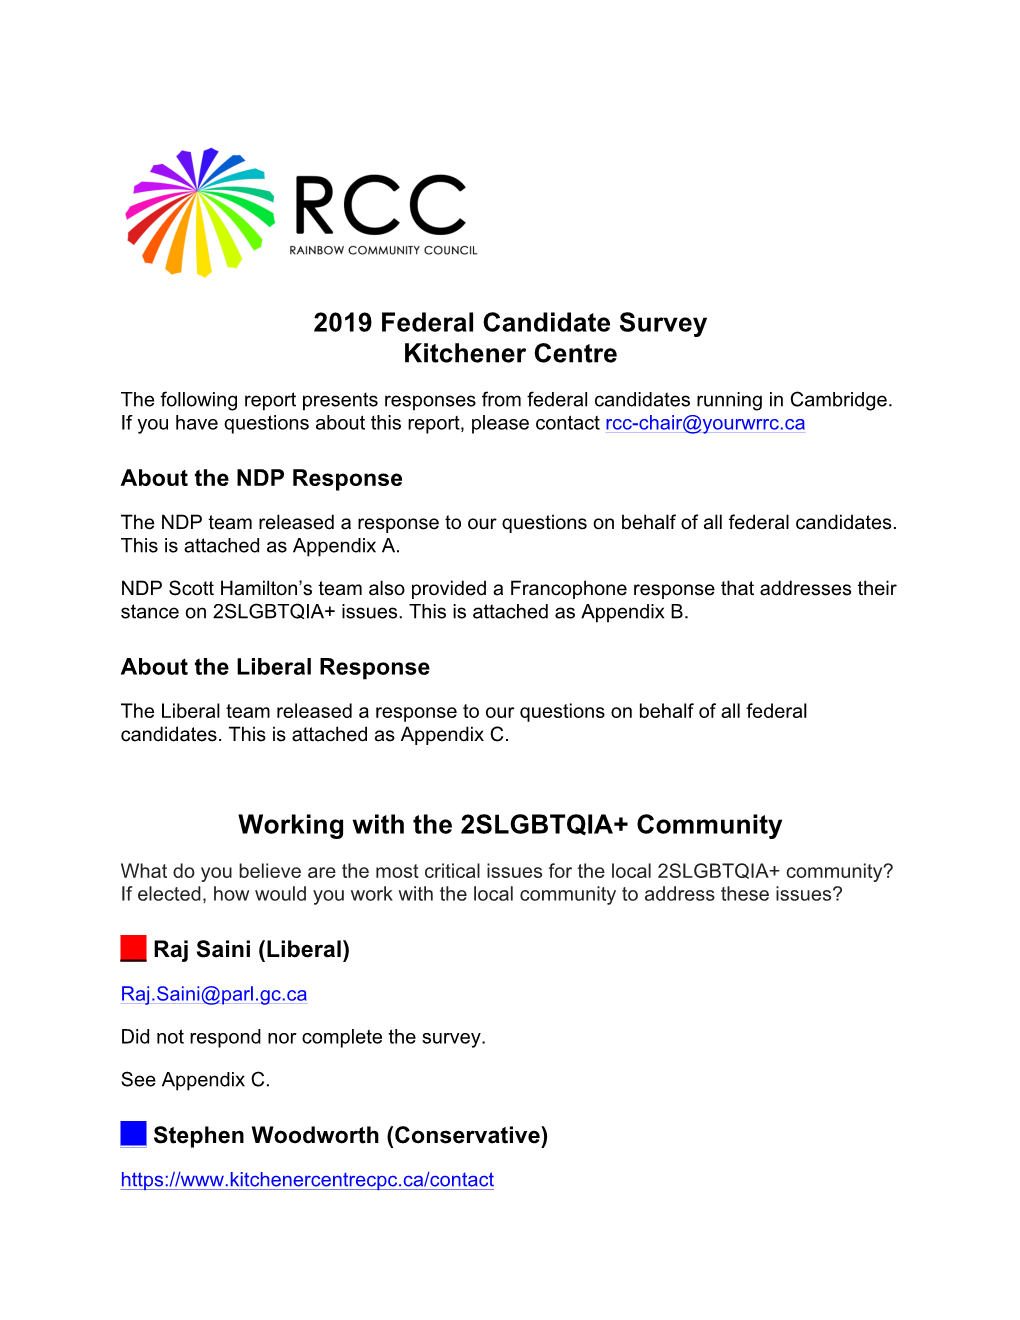 Kitchener Centre the Following Report Presents Responses from Federal Candidates Running in Cambridge